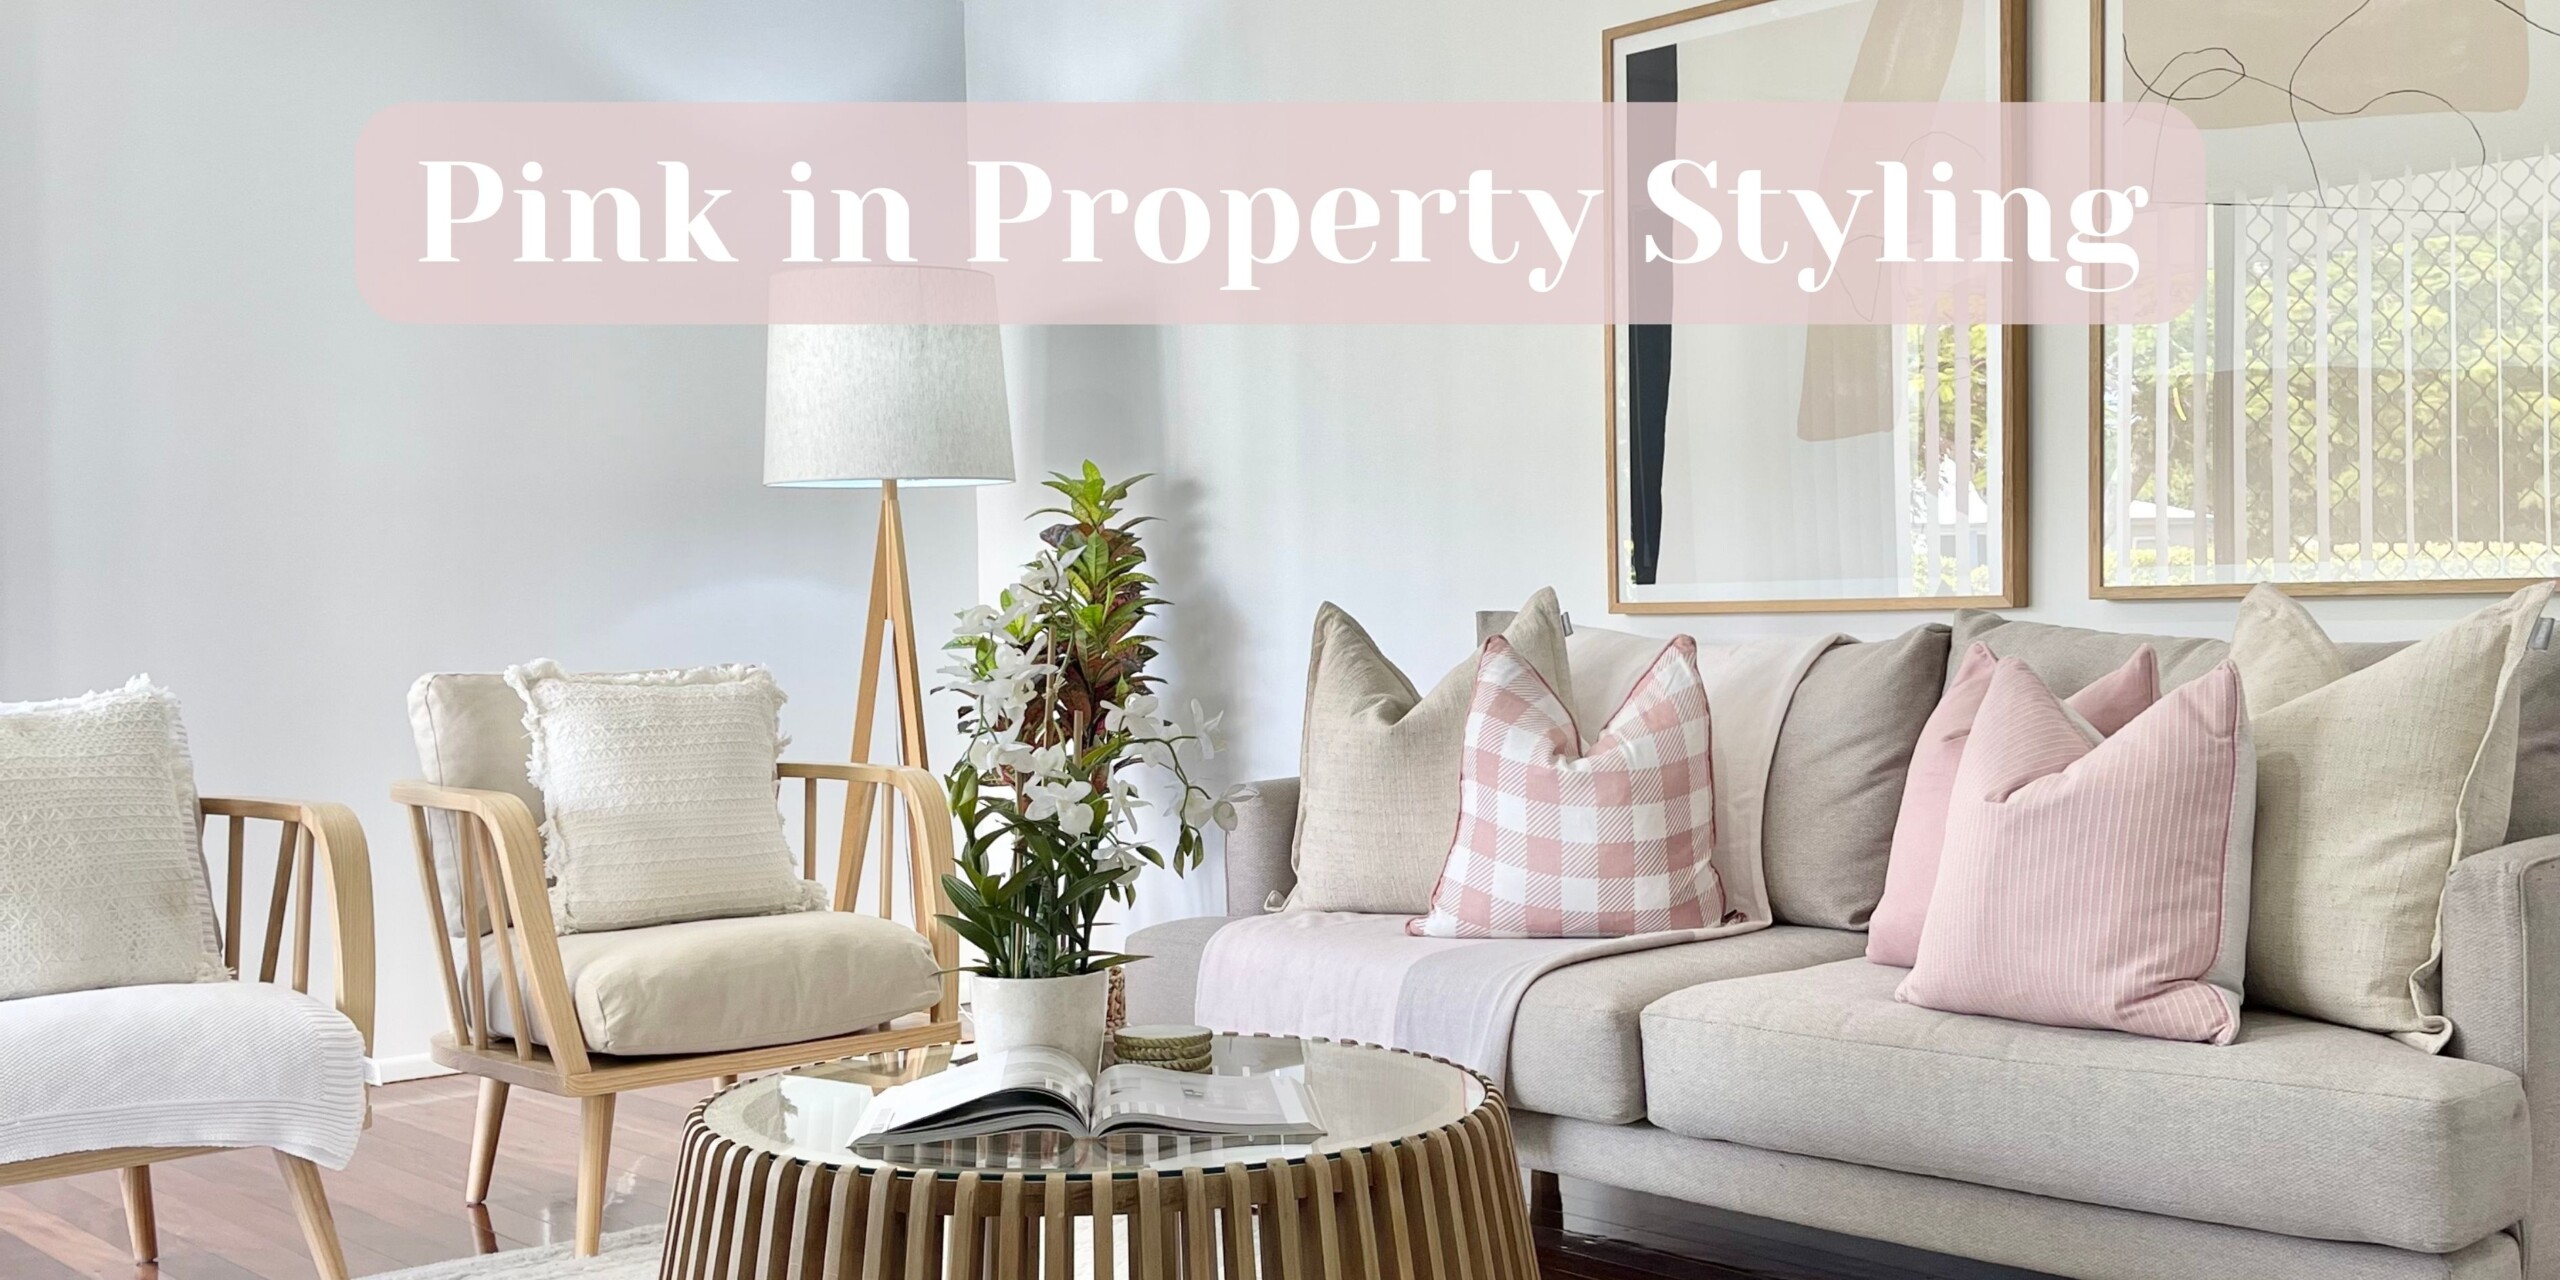 Pink property styling, pink in home staging - a white and cream living room with pink accents